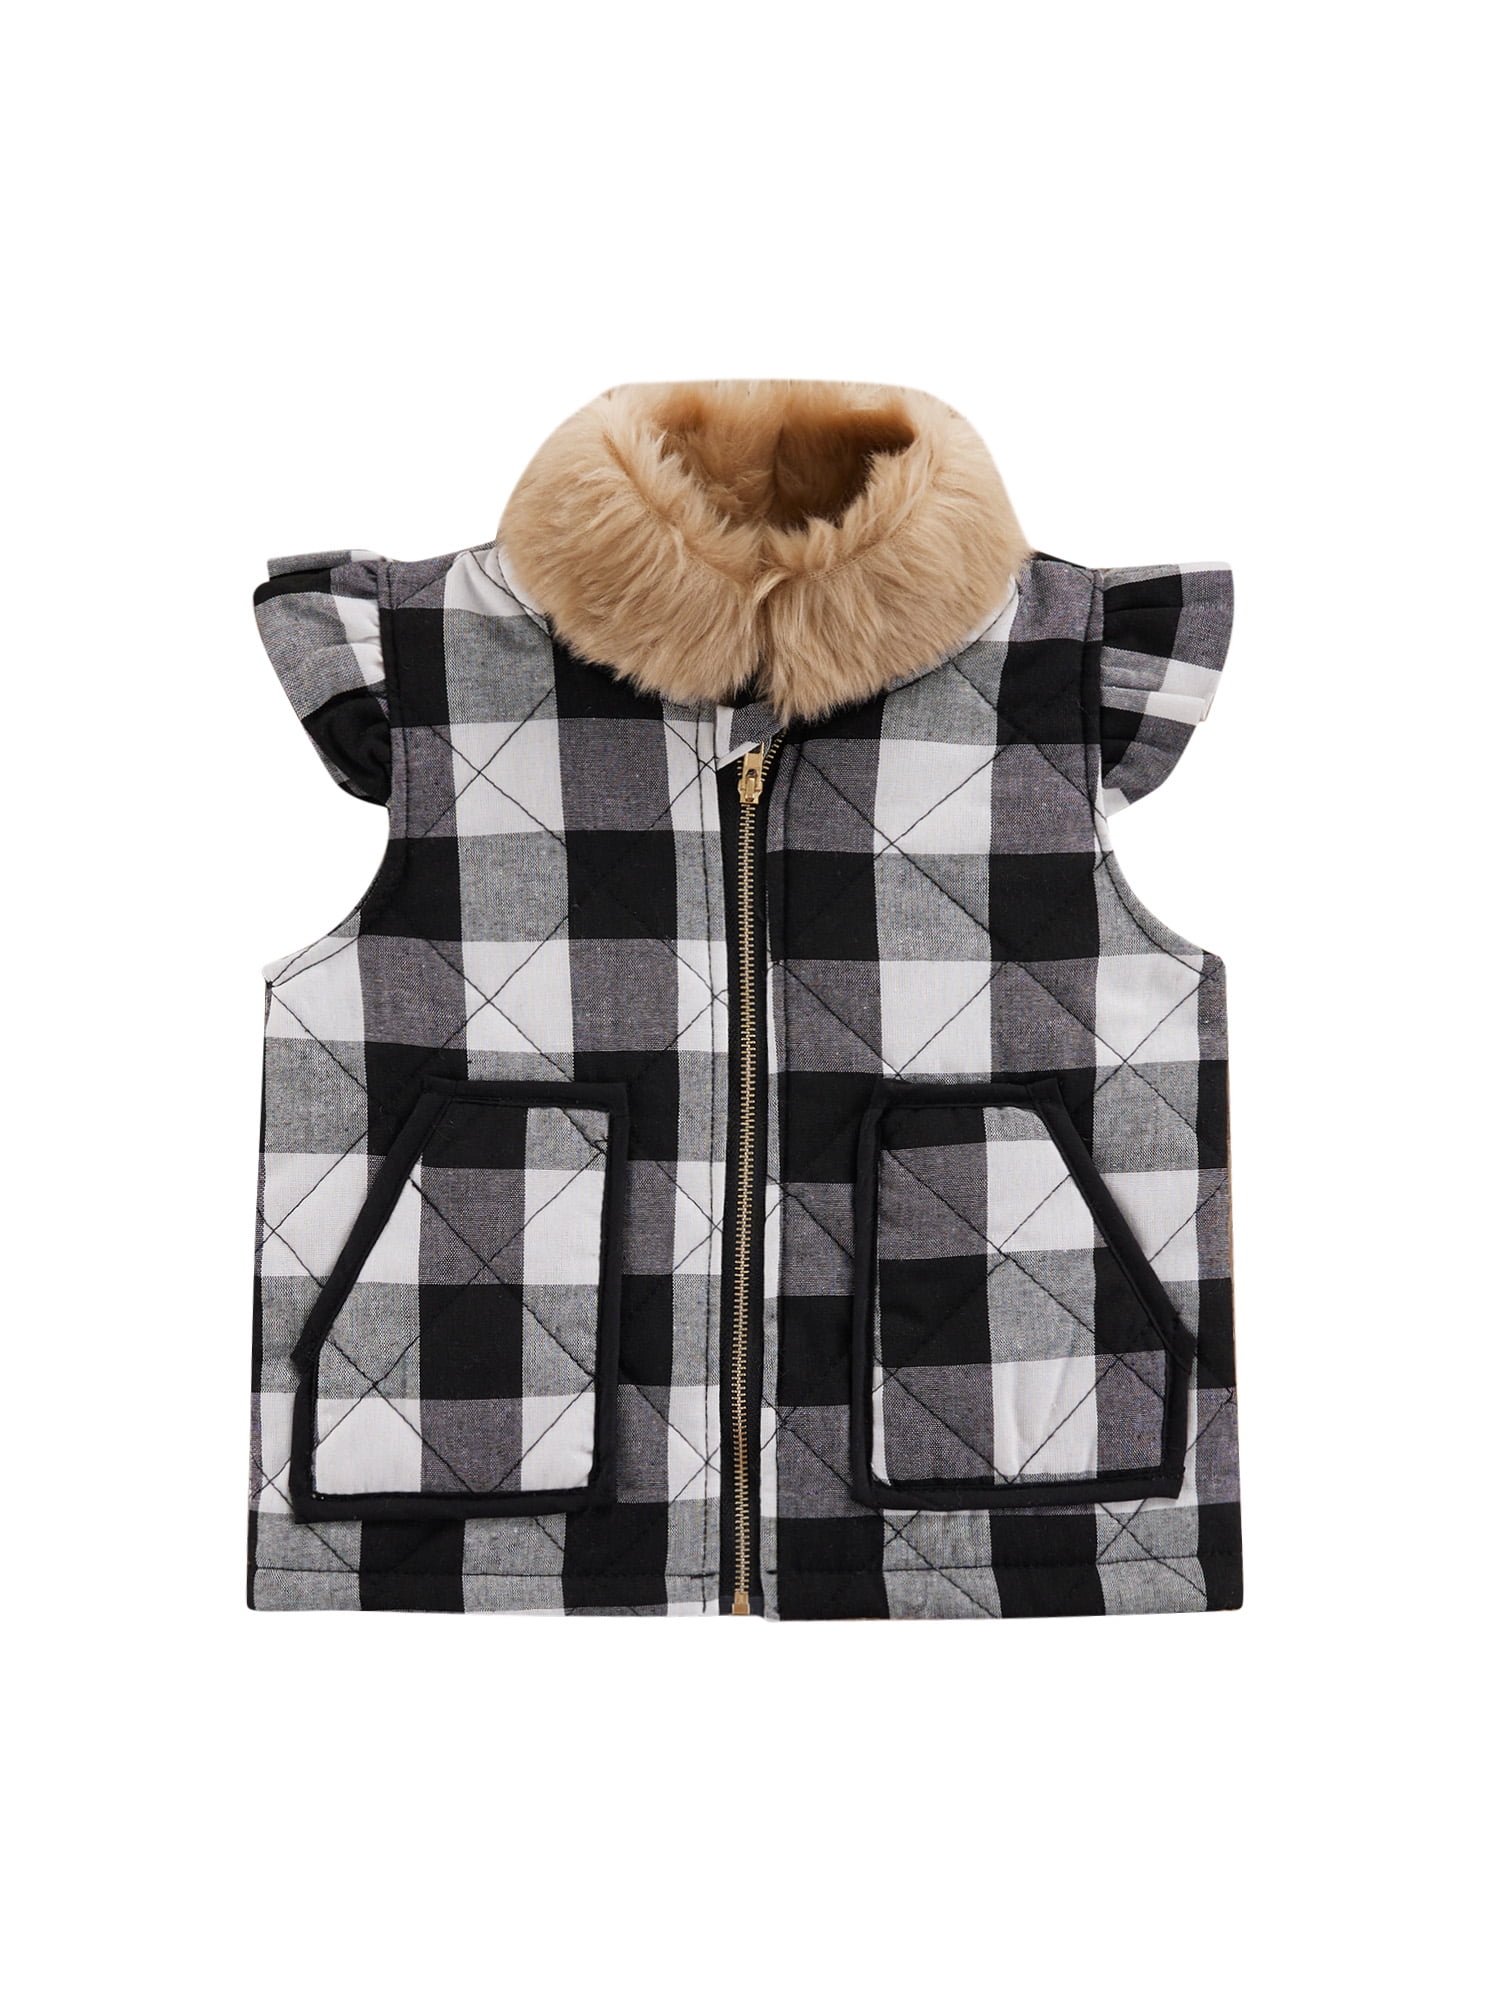 Girls Vest Cute Buffalo Plaid Puffer Quilted Jackets Fall Clothes Winter Warm Lined Gilet 